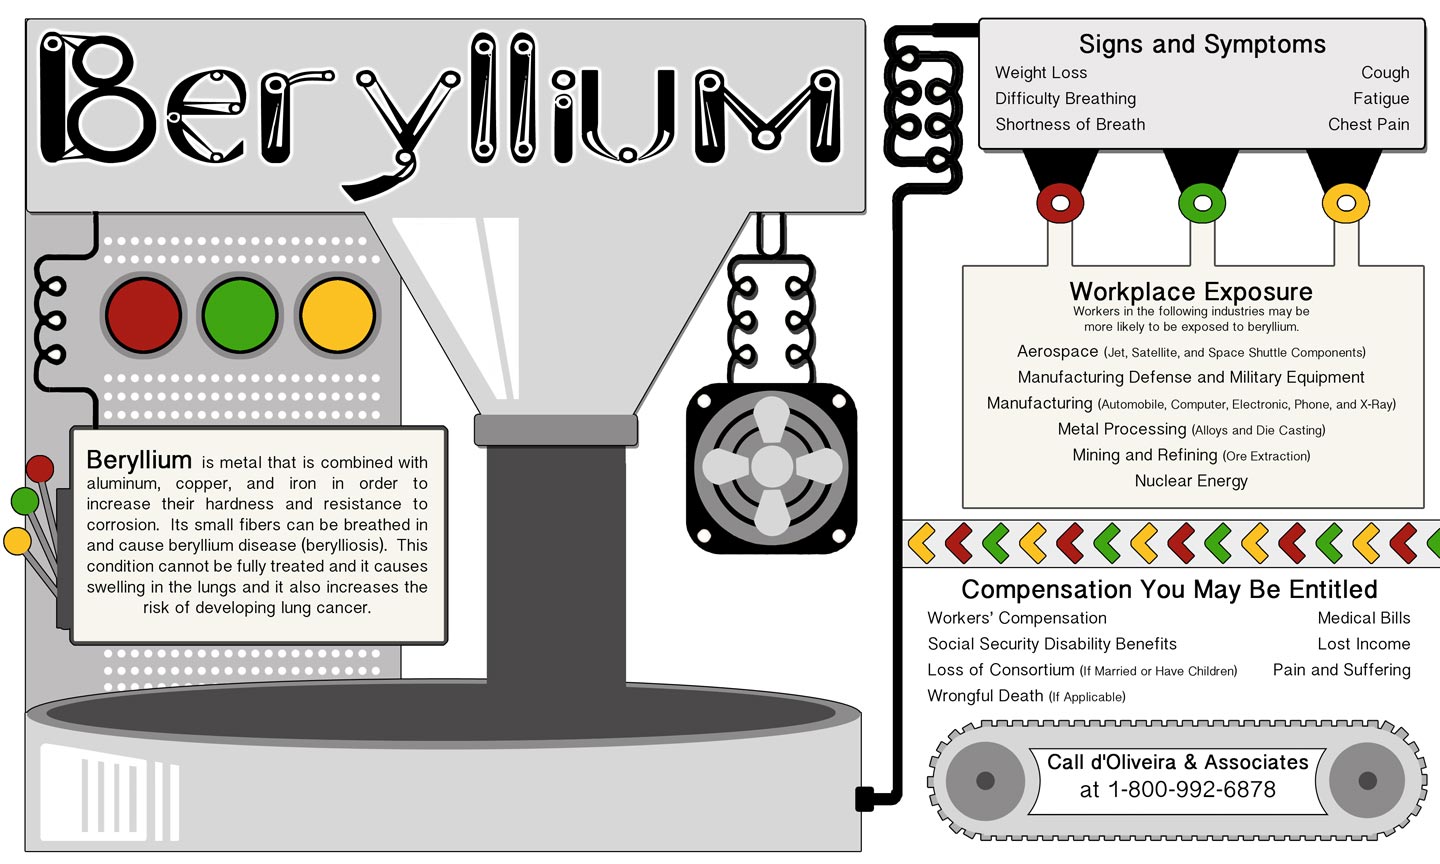 Beryllium Infographic lists signs and symptoms and workplace exposure